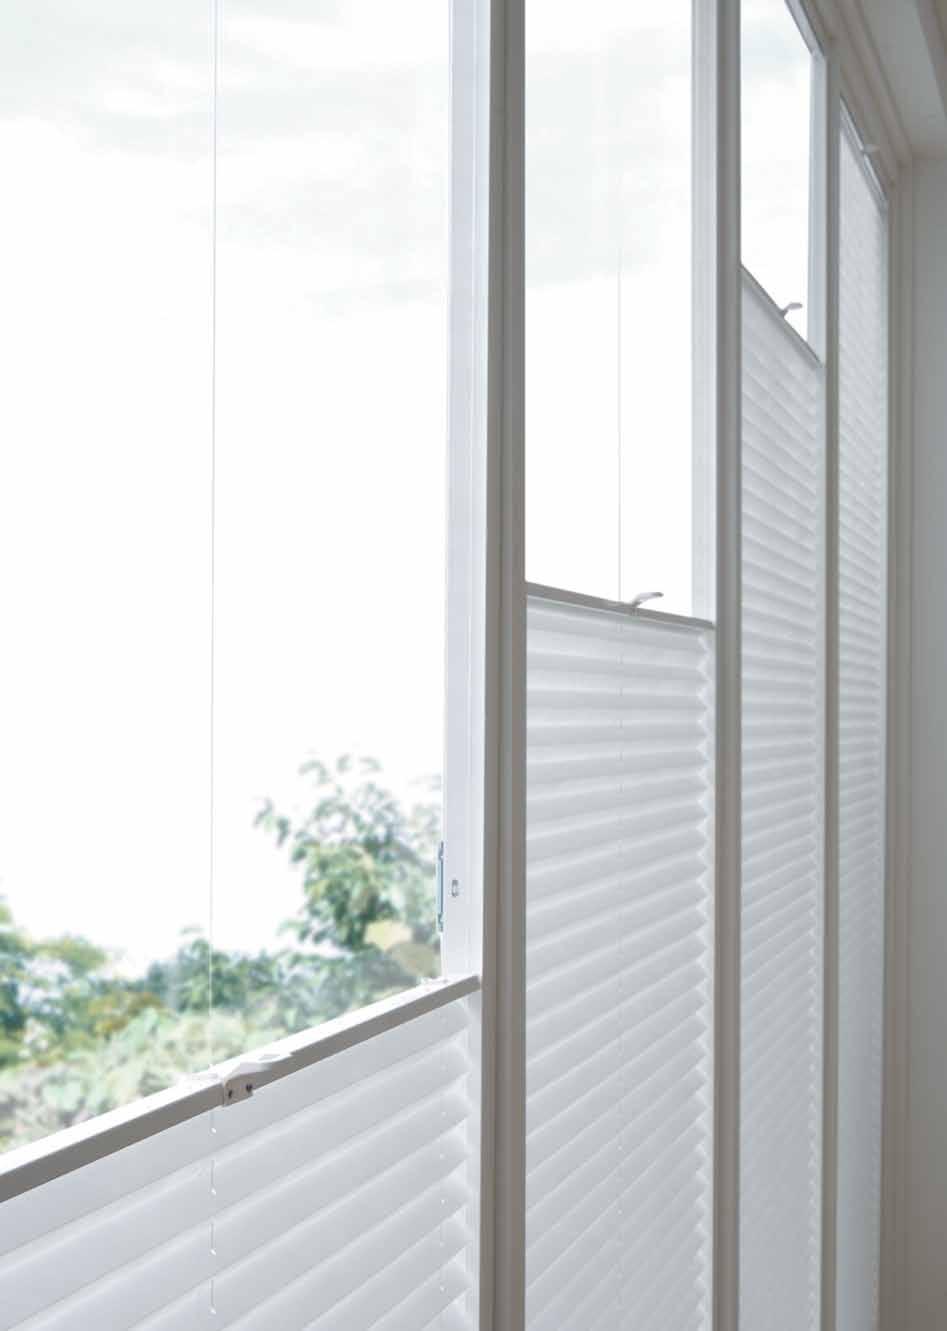 Intu Intu blinds are an ideal solution for conservatories, windows and doors and